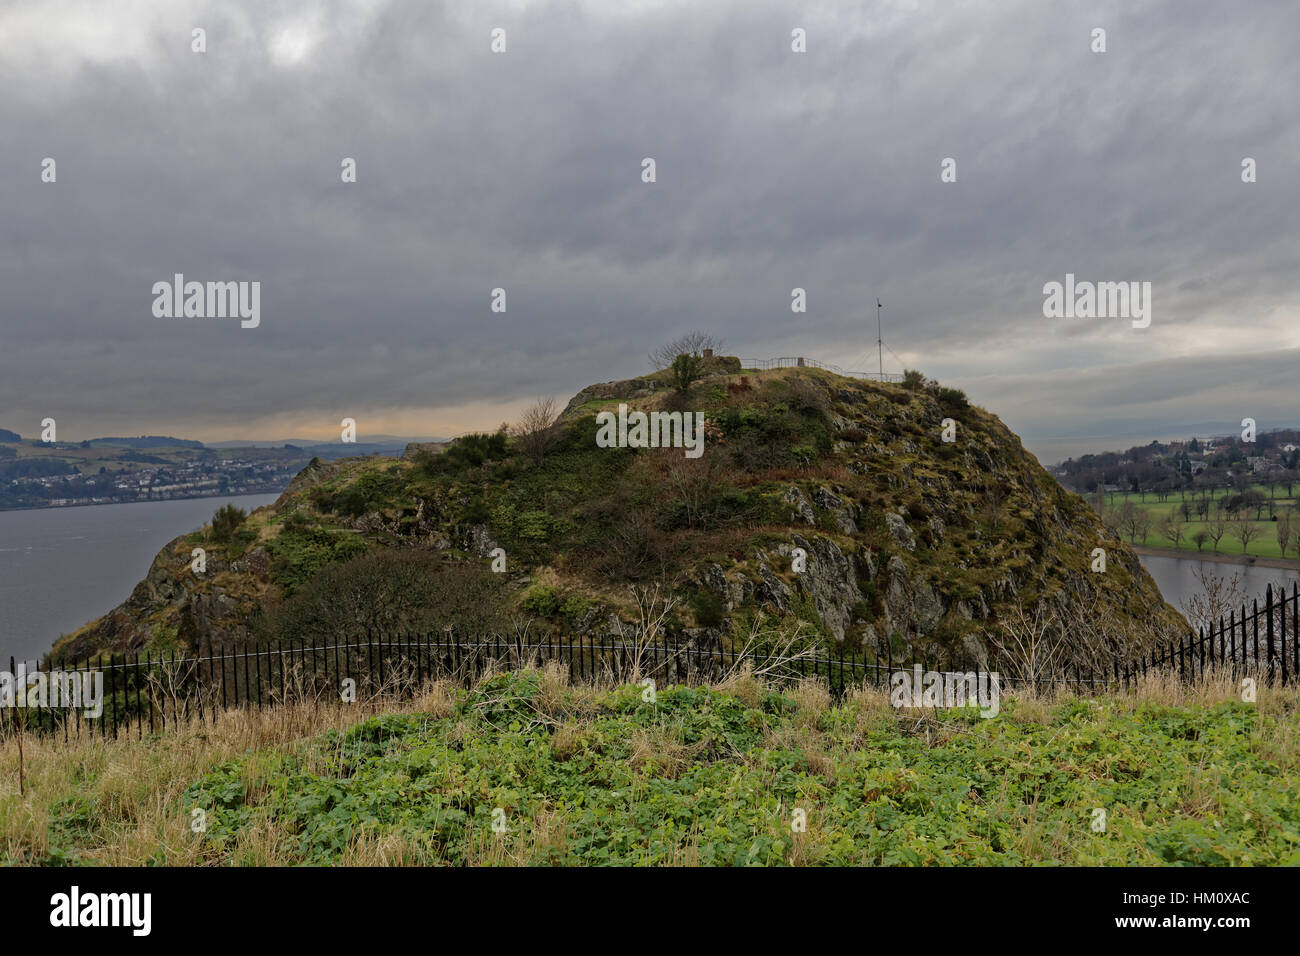 White Tower Crag The highest point on the Rock, Dumbarton Castle in Scotland. It overlooks the Scottish town of Dumbarton Stock Photo